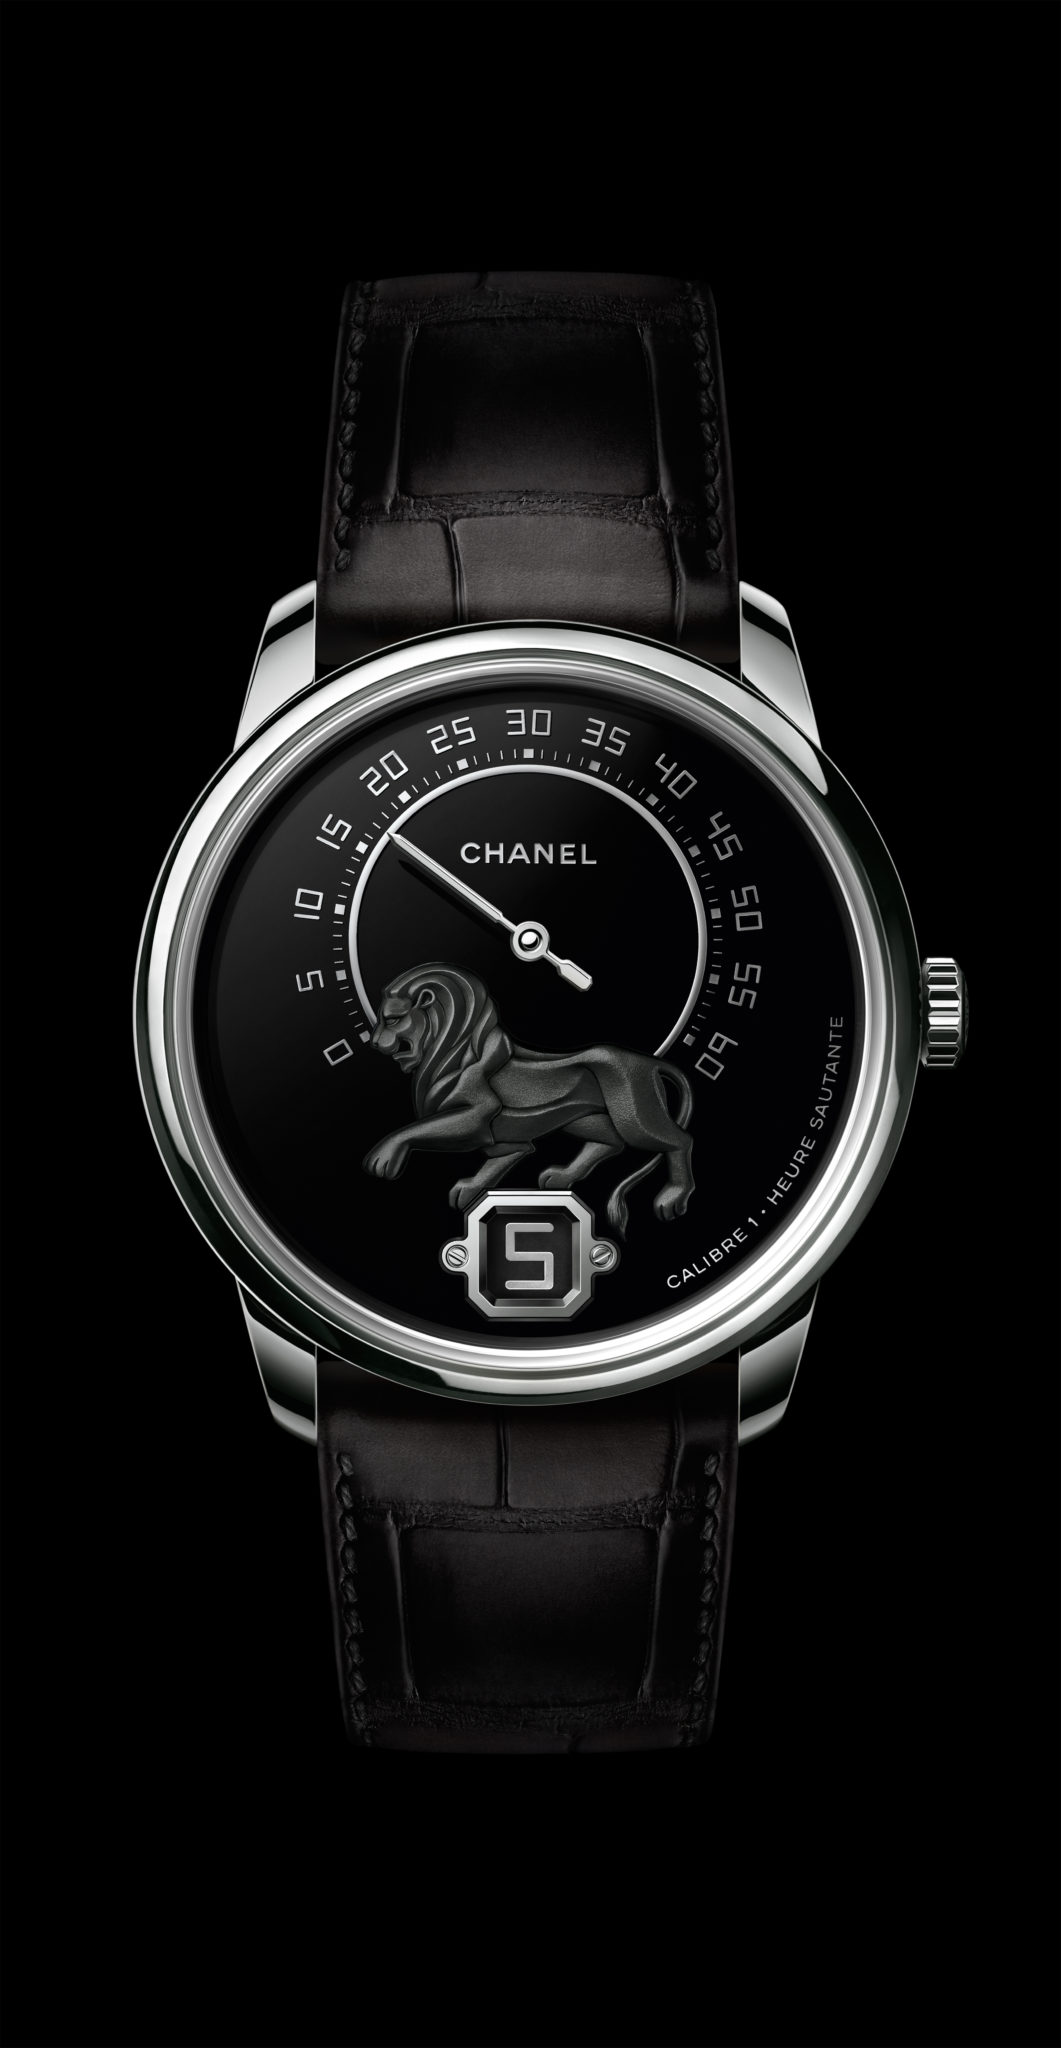 IN PICS: Chanel Champions Luxury With Latest Watch Releases